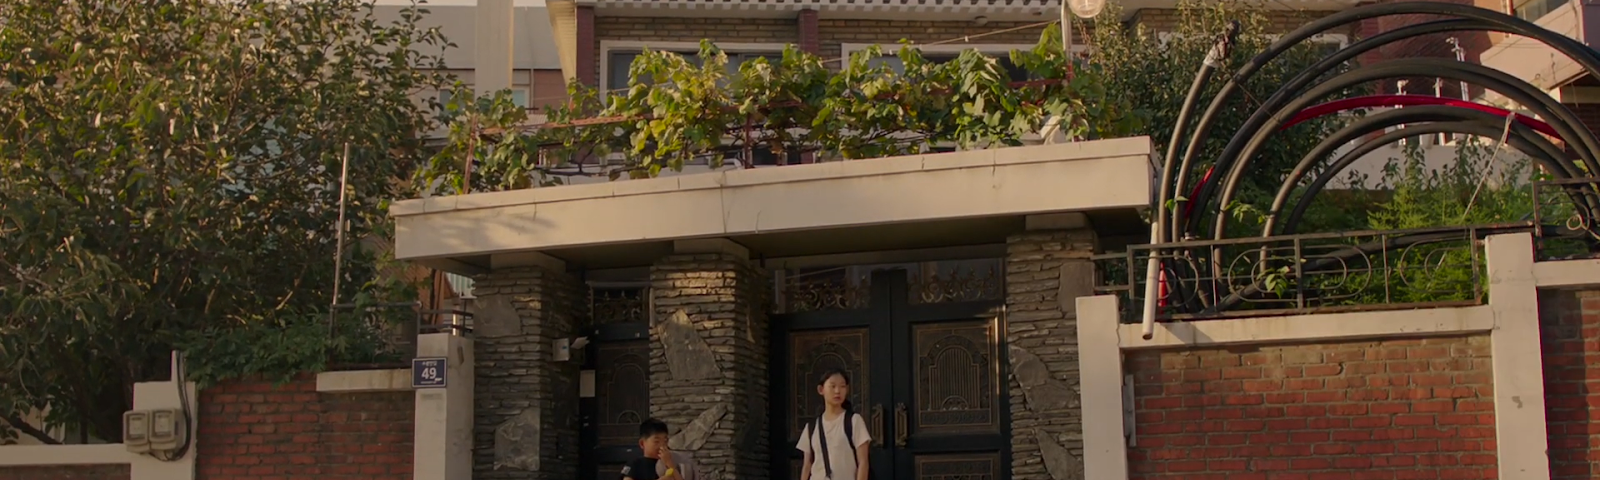 Film still from MOVING ON, of siblings Okju and Dongju in front of the house’s exterior, standing on the side of the road.